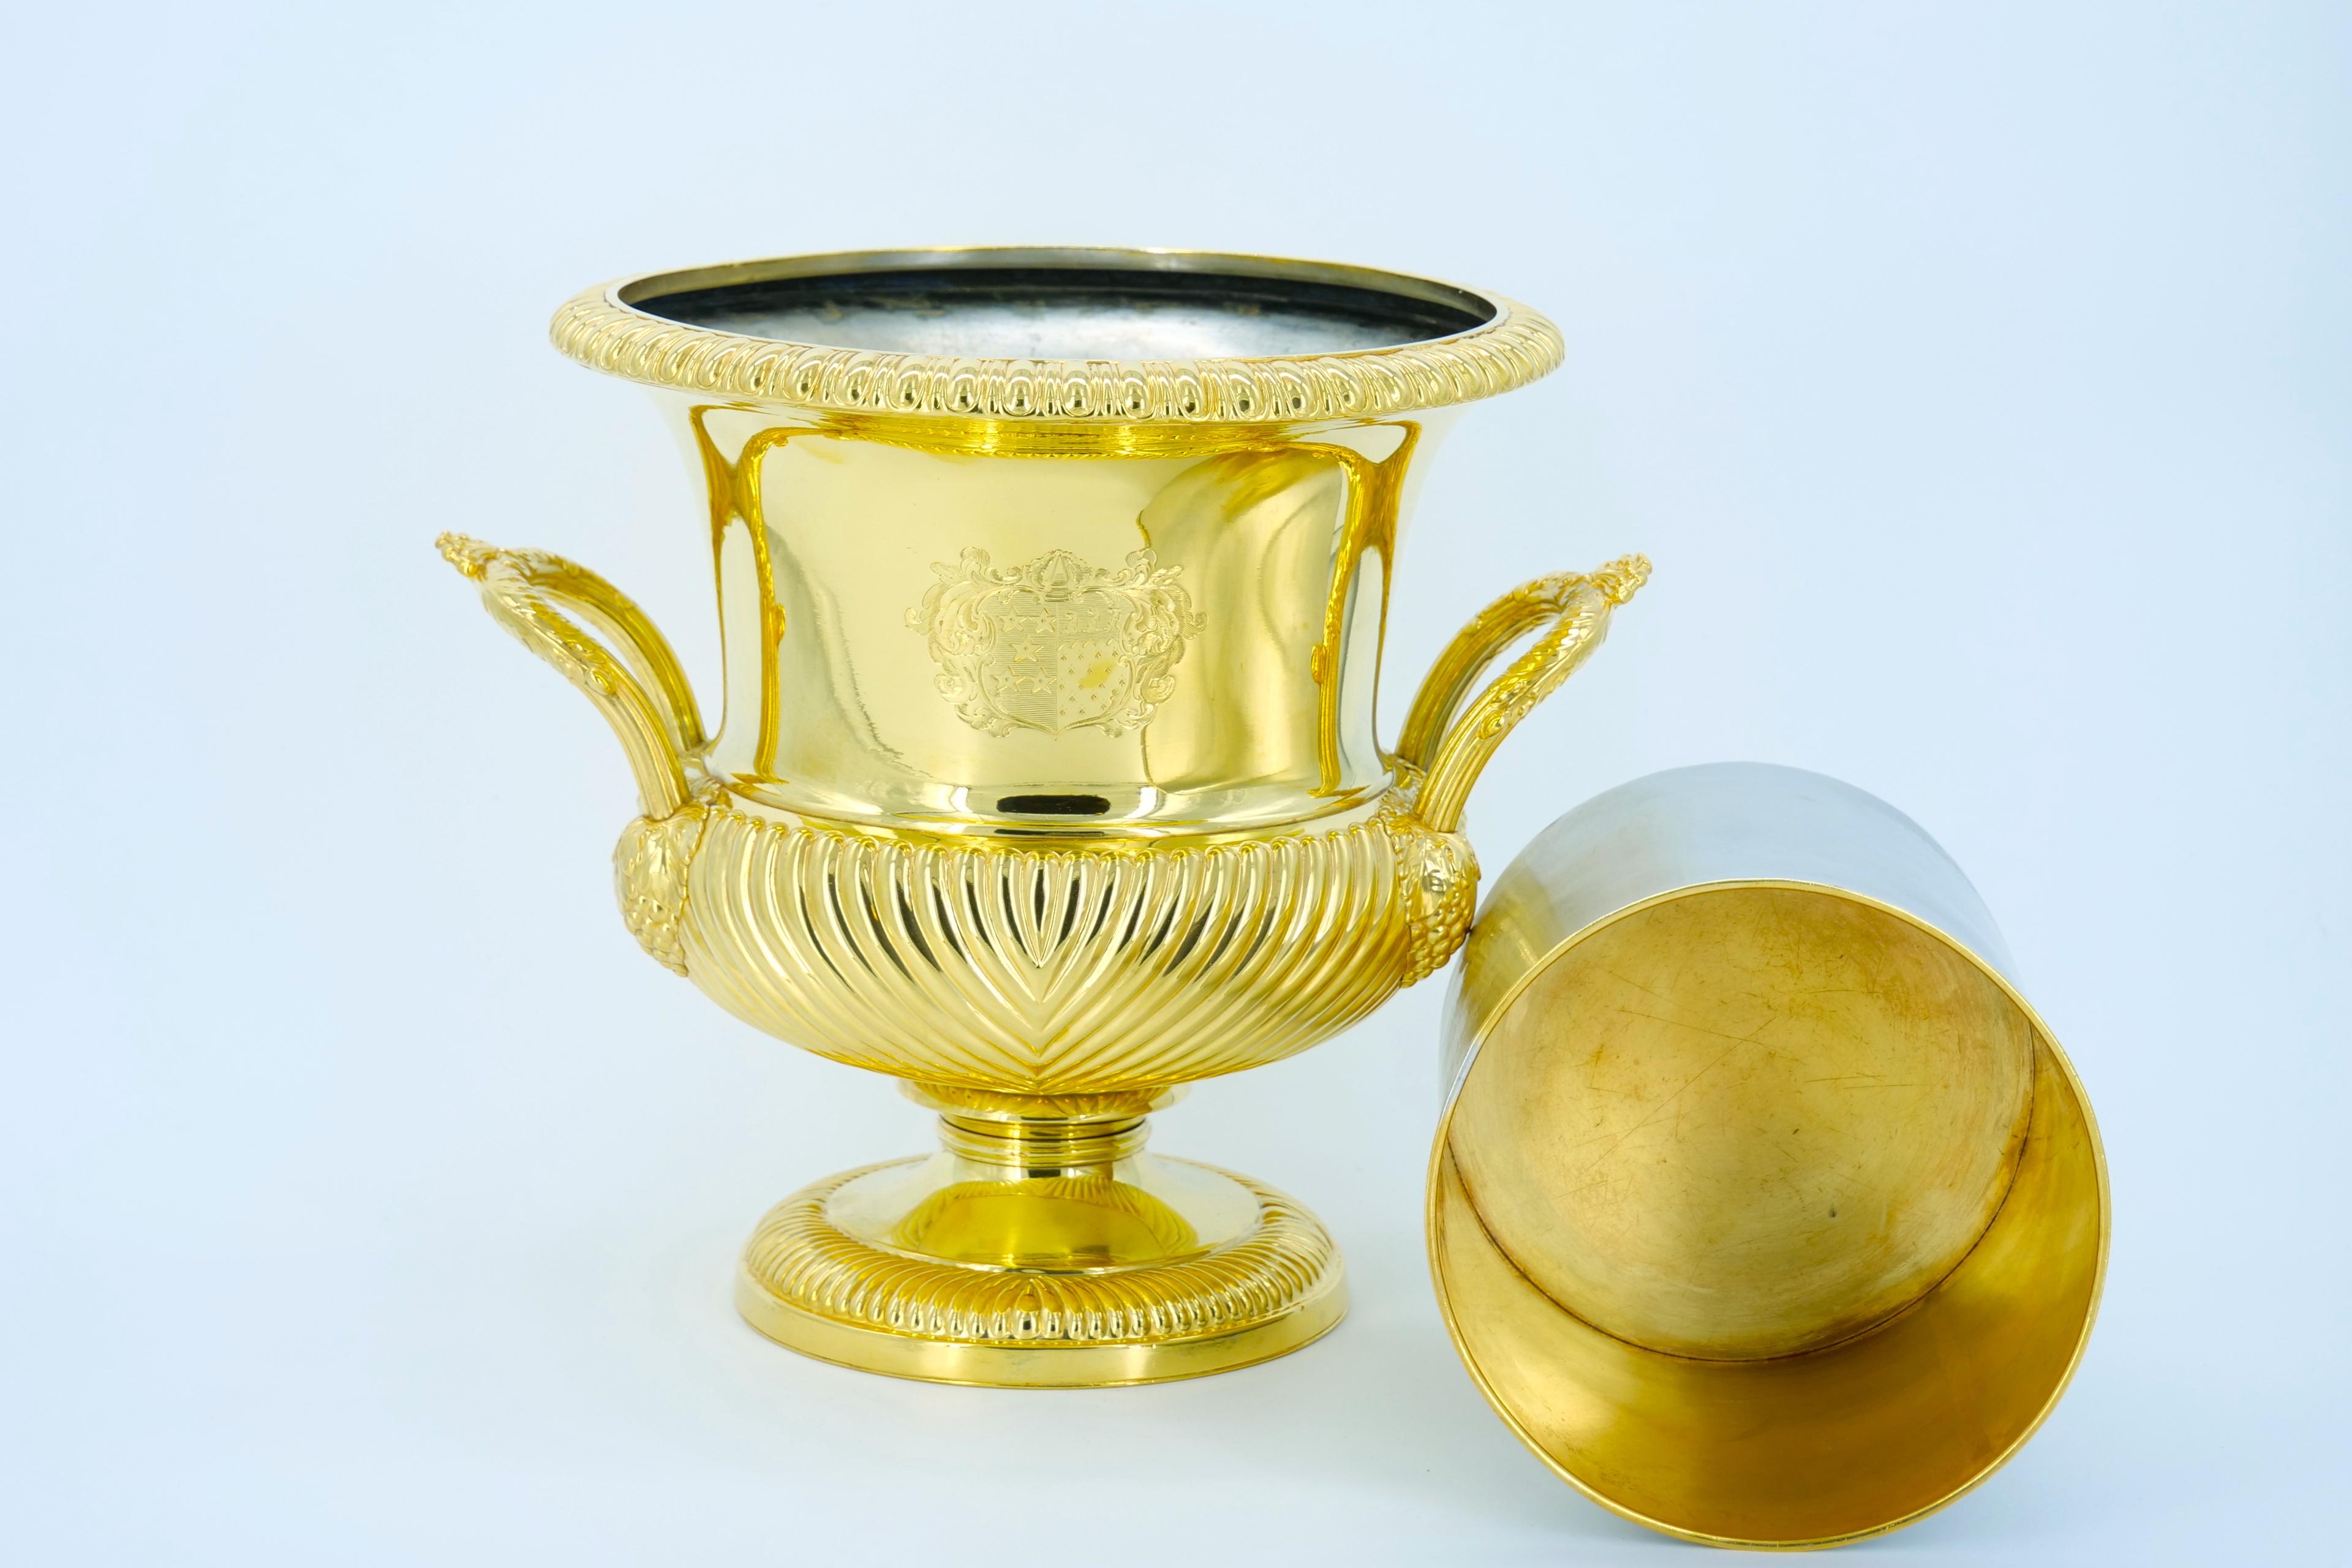 English Victorian period campana vase form gold-washed silverplate ice bucket with foliate handles, gadrooning at the base and waist with rim decorated with egg-and-dart motif. With original two-piece liner. Inscribed rampant dragon engraved on one